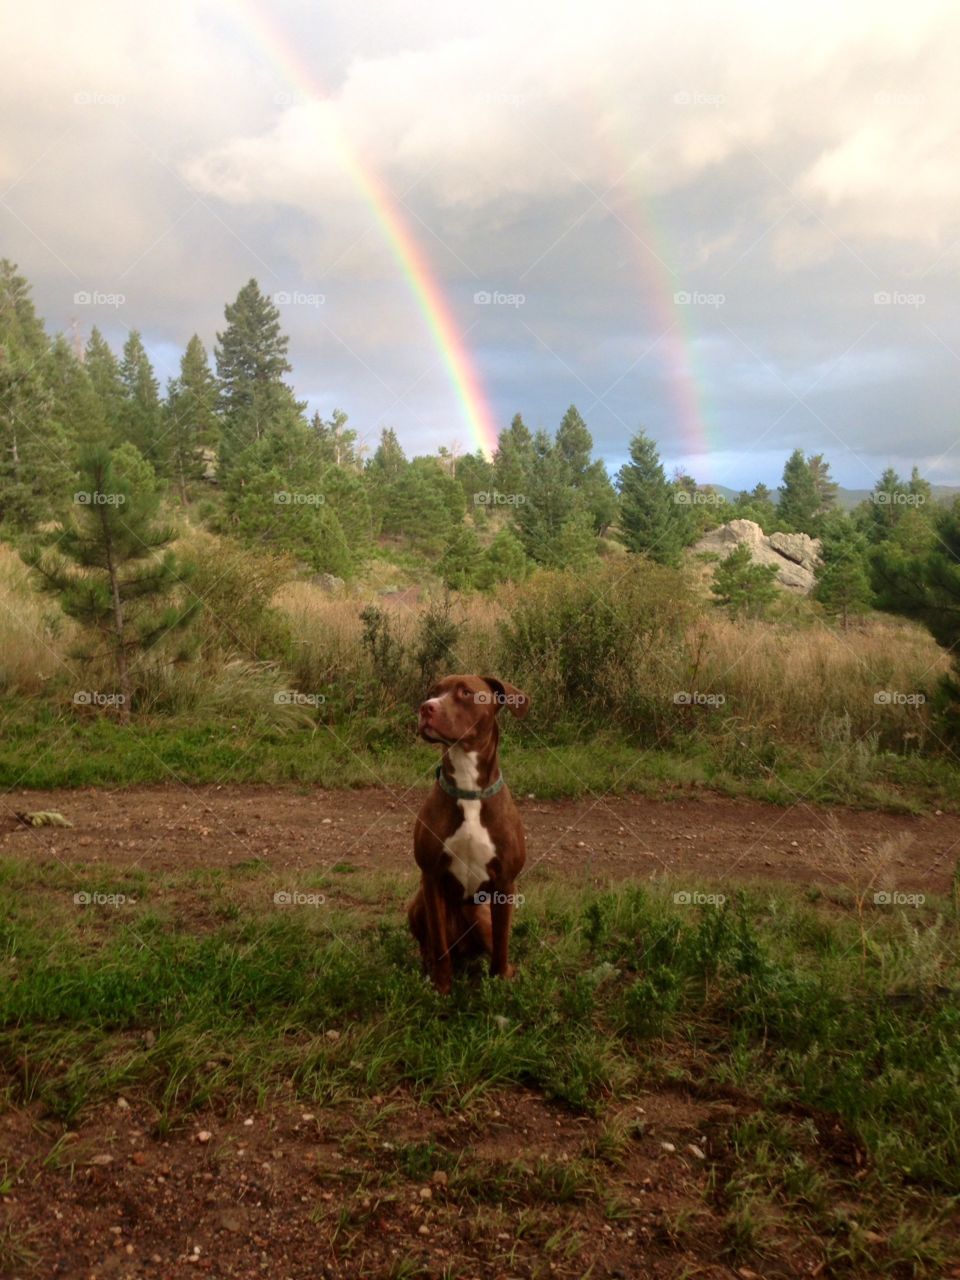 Double rainbow. A double rainbow after a brief rainstorm. Our dog makes the photo even more beautiful. 